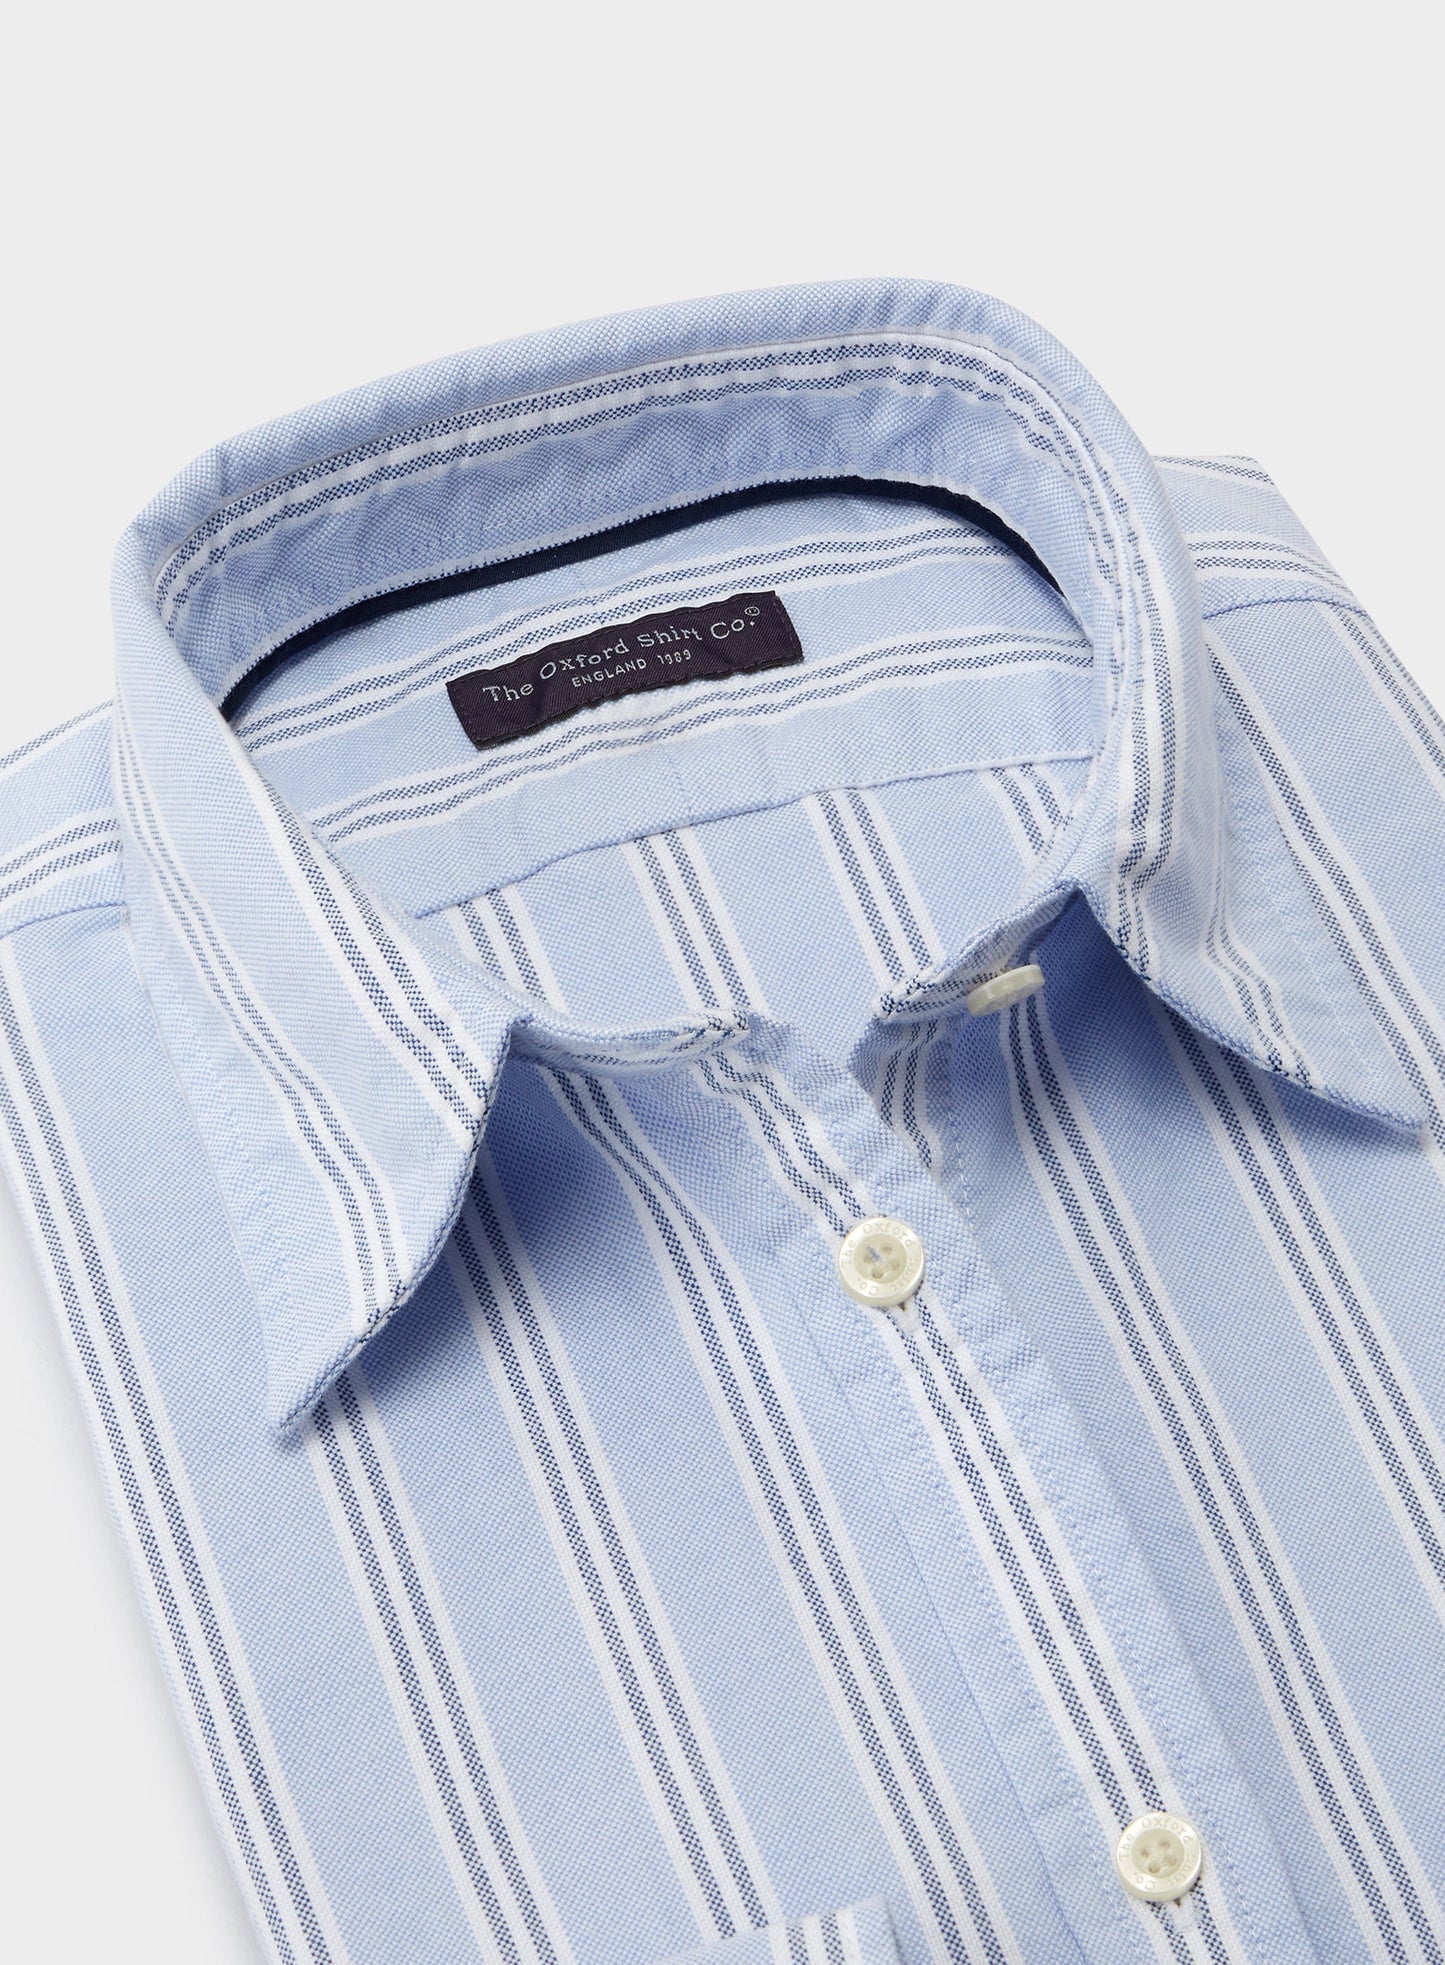 Classic Oxford Shirt - Blue and Navy Stripe